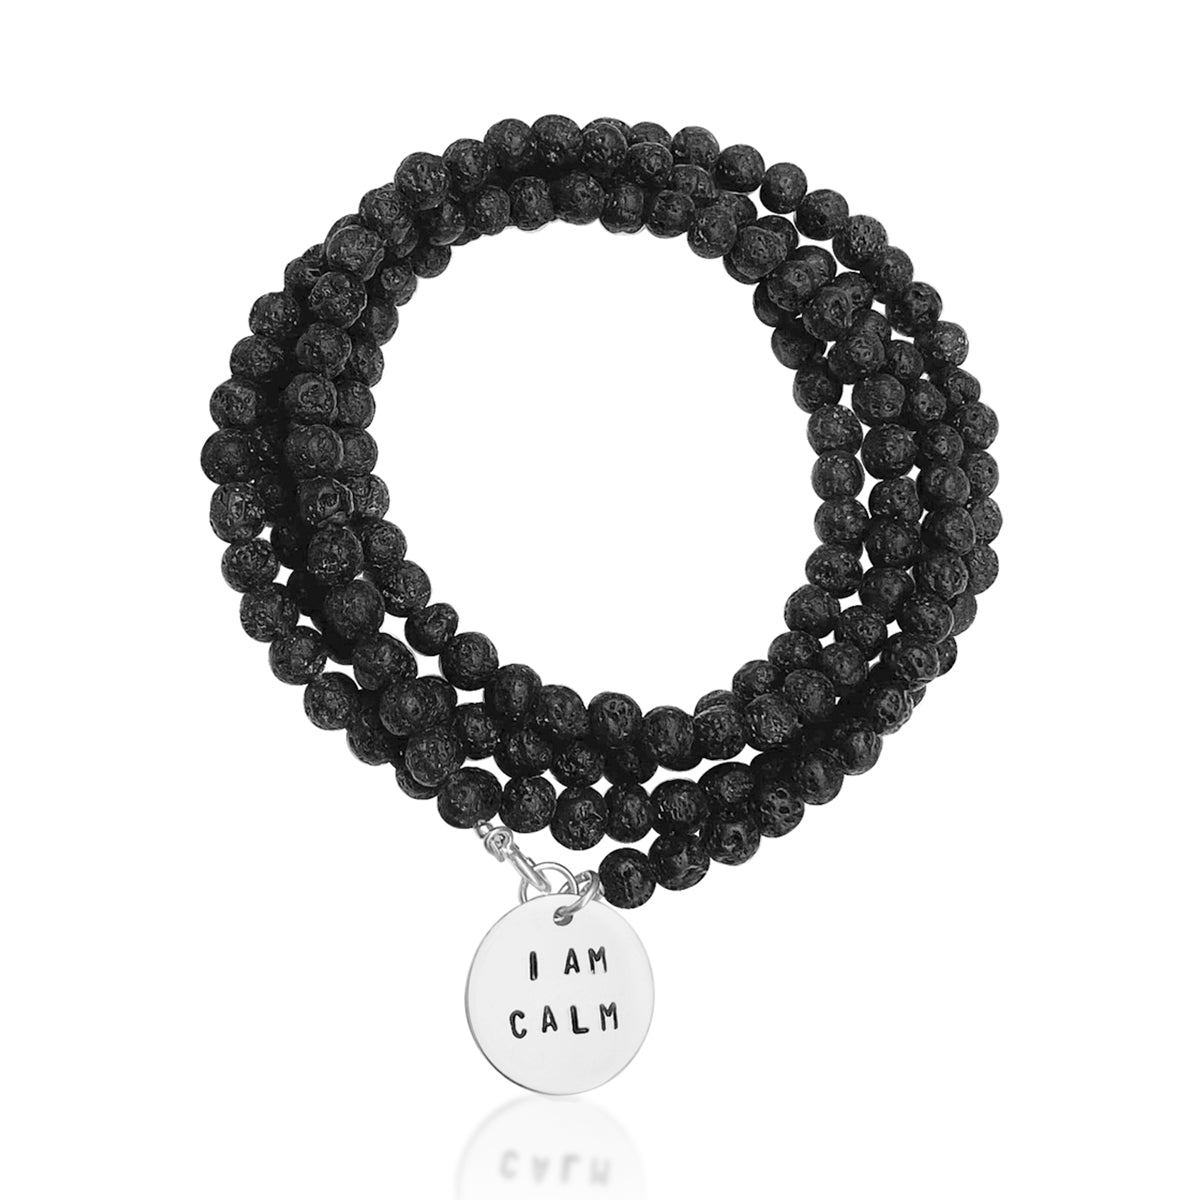 I am Calm Affirmation Bracelet with Lava Stone to Find Serenity.